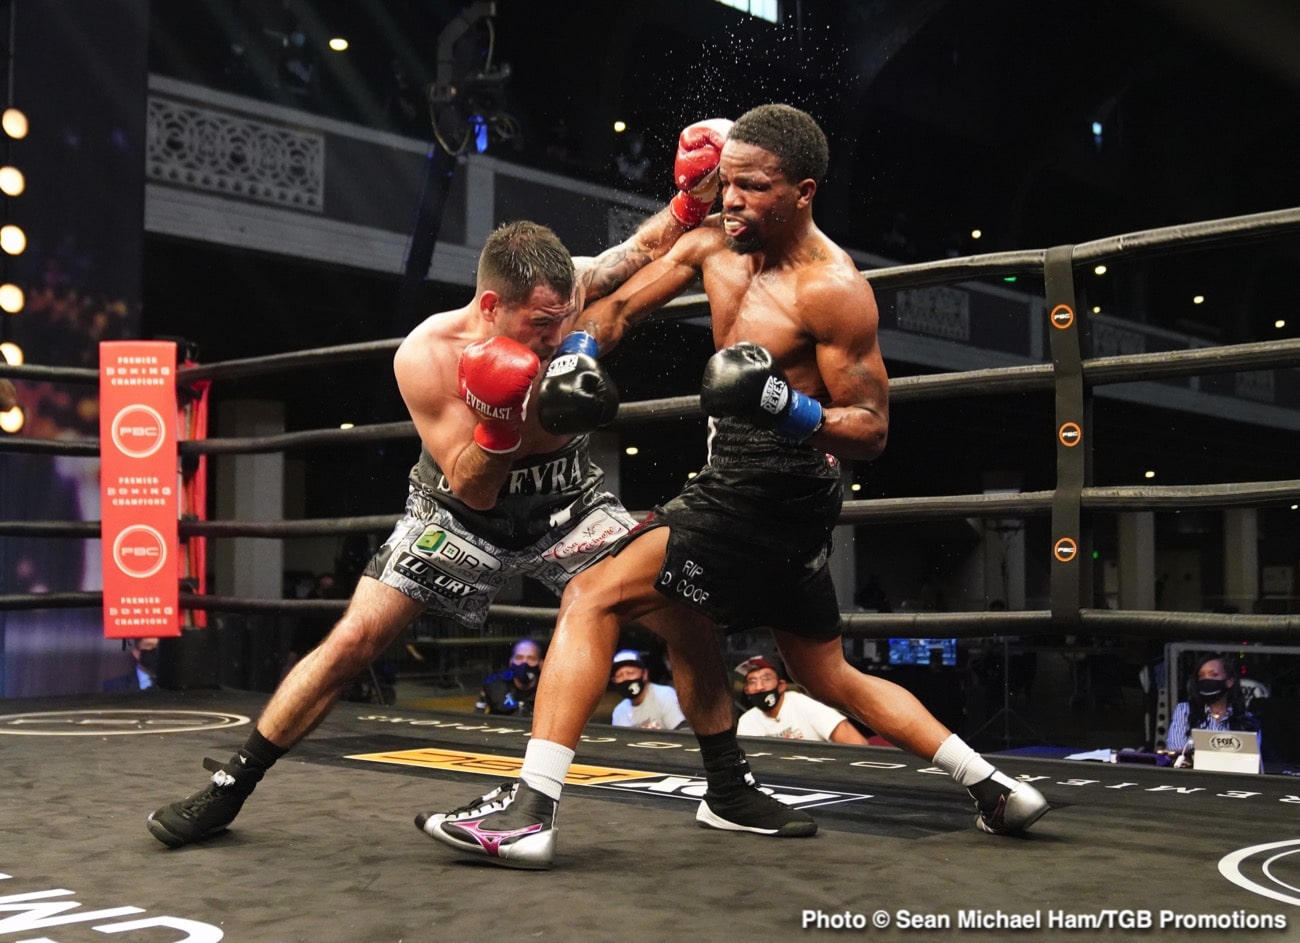 Image: Boxing Results: Frank “The Ghost” Martin Stops Jerry Perez in L.A. Tuesday!